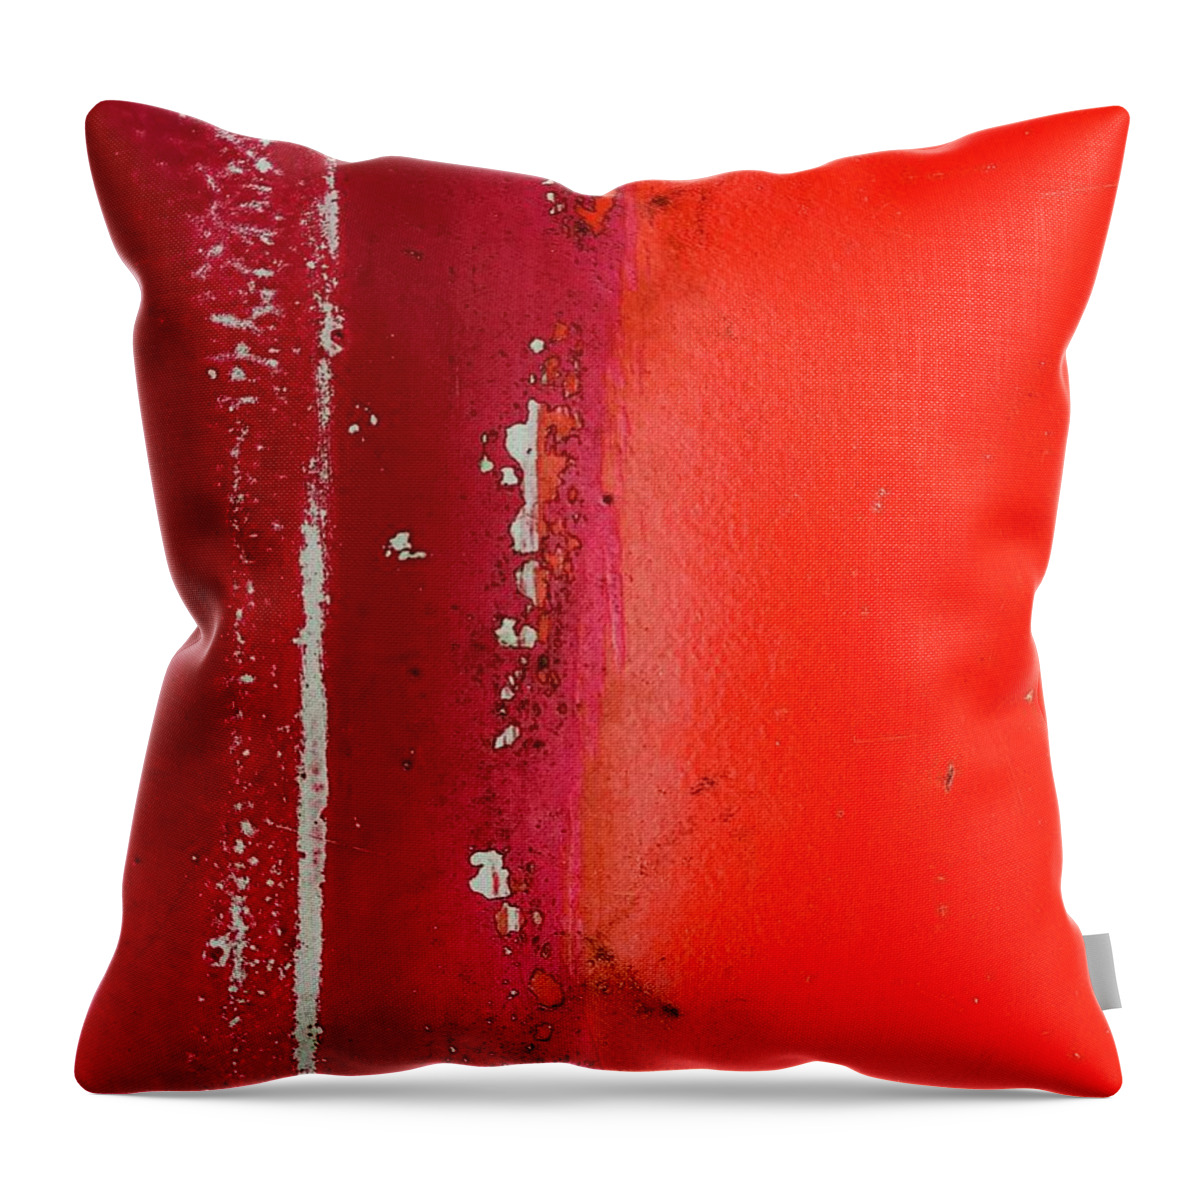 Orange Throw Pillow featuring the photograph Orange Paint Abstract by Eena Bo